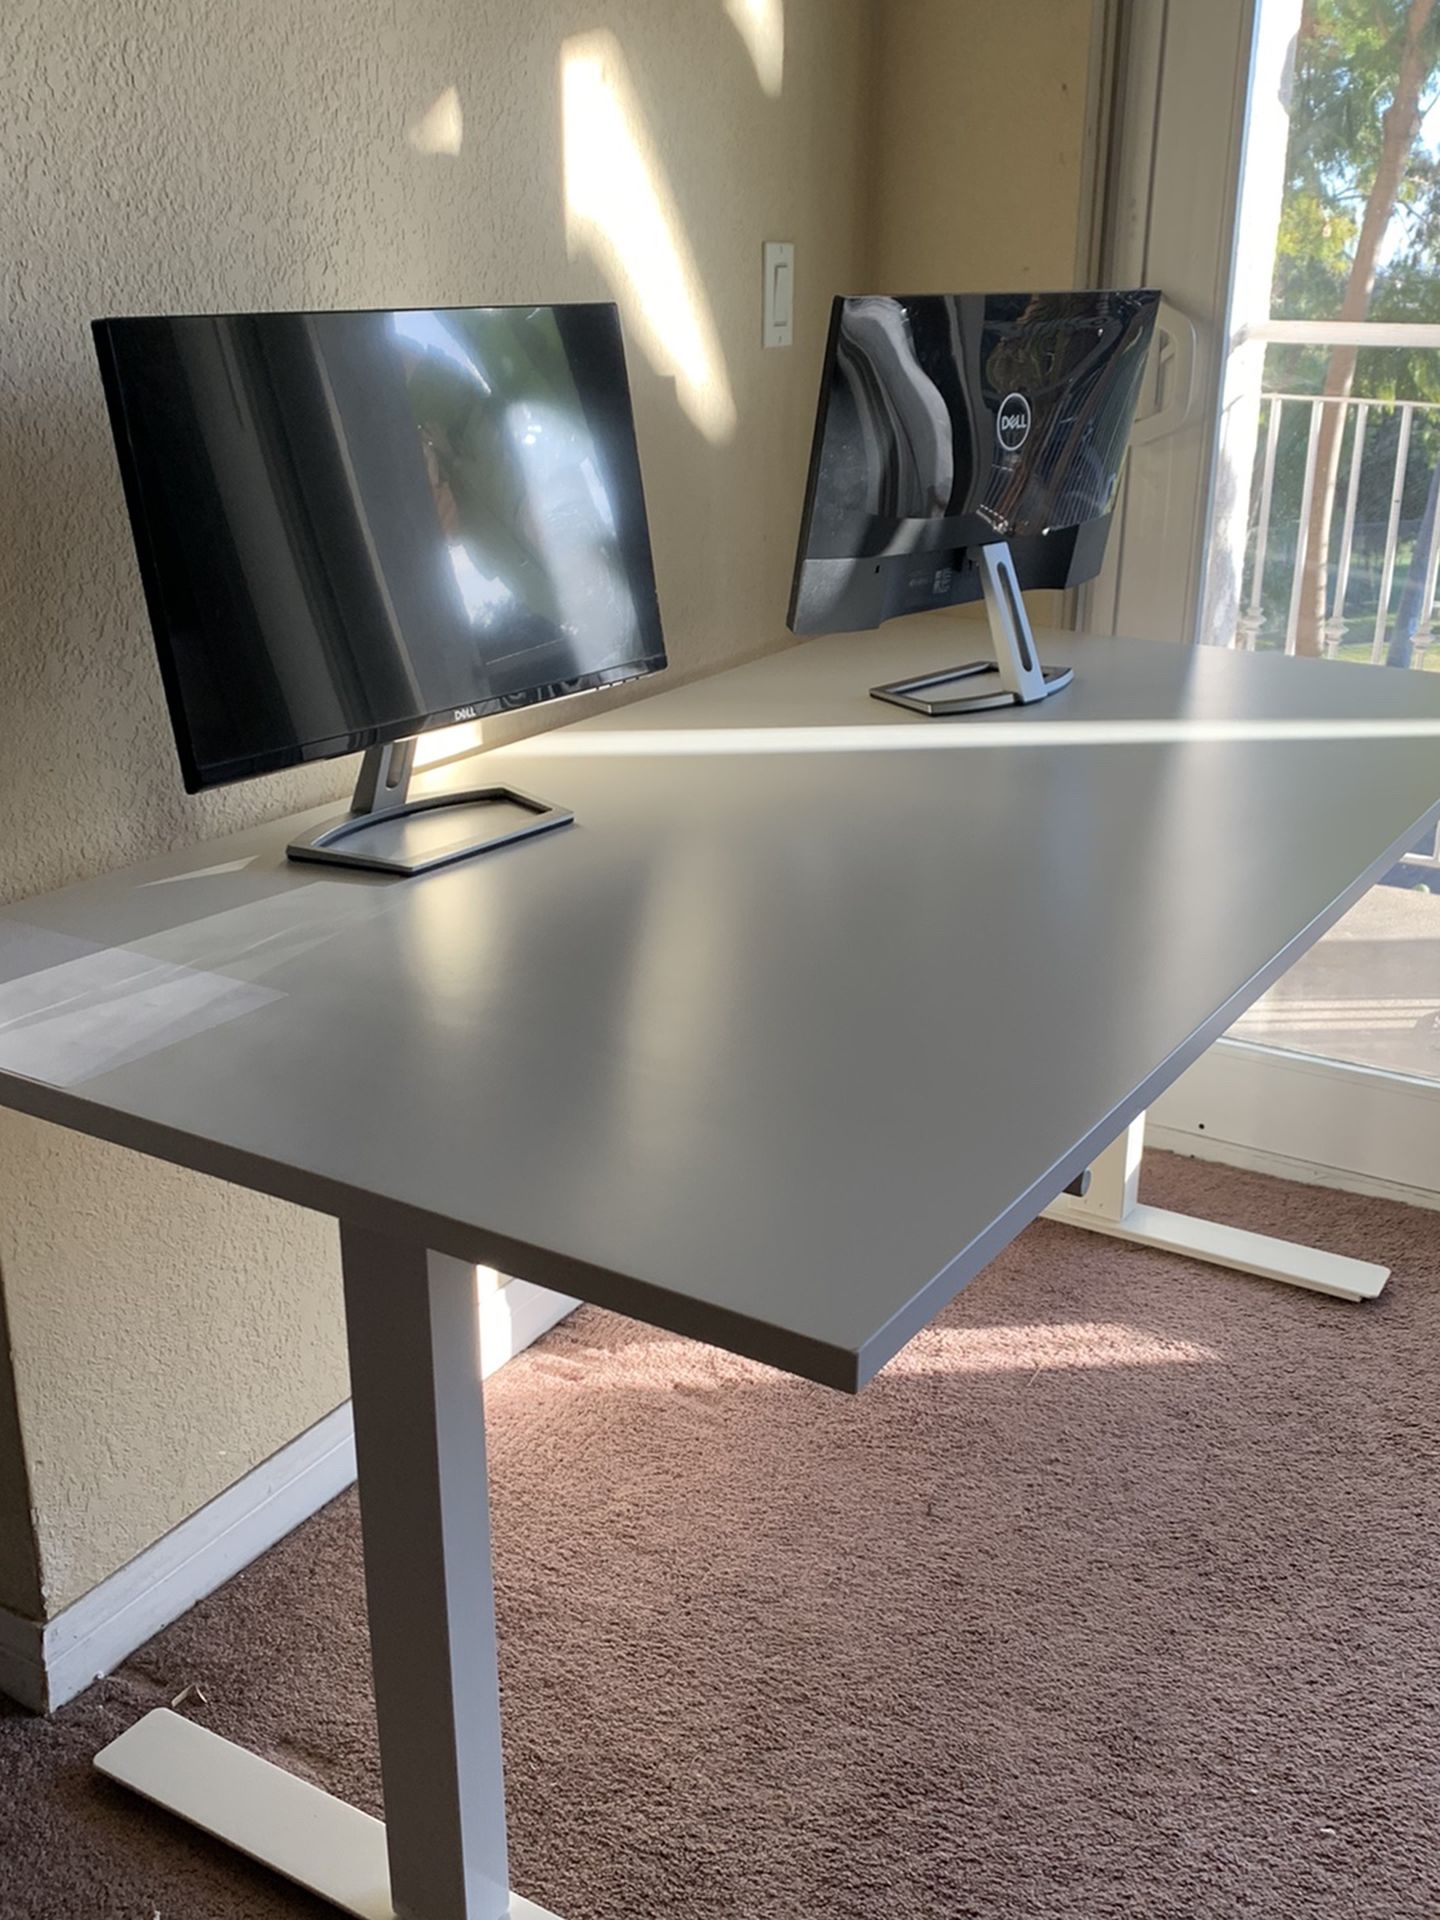 IKEA Sit/Raise Desk! Very Good Condition! $100 Or Best Offer!